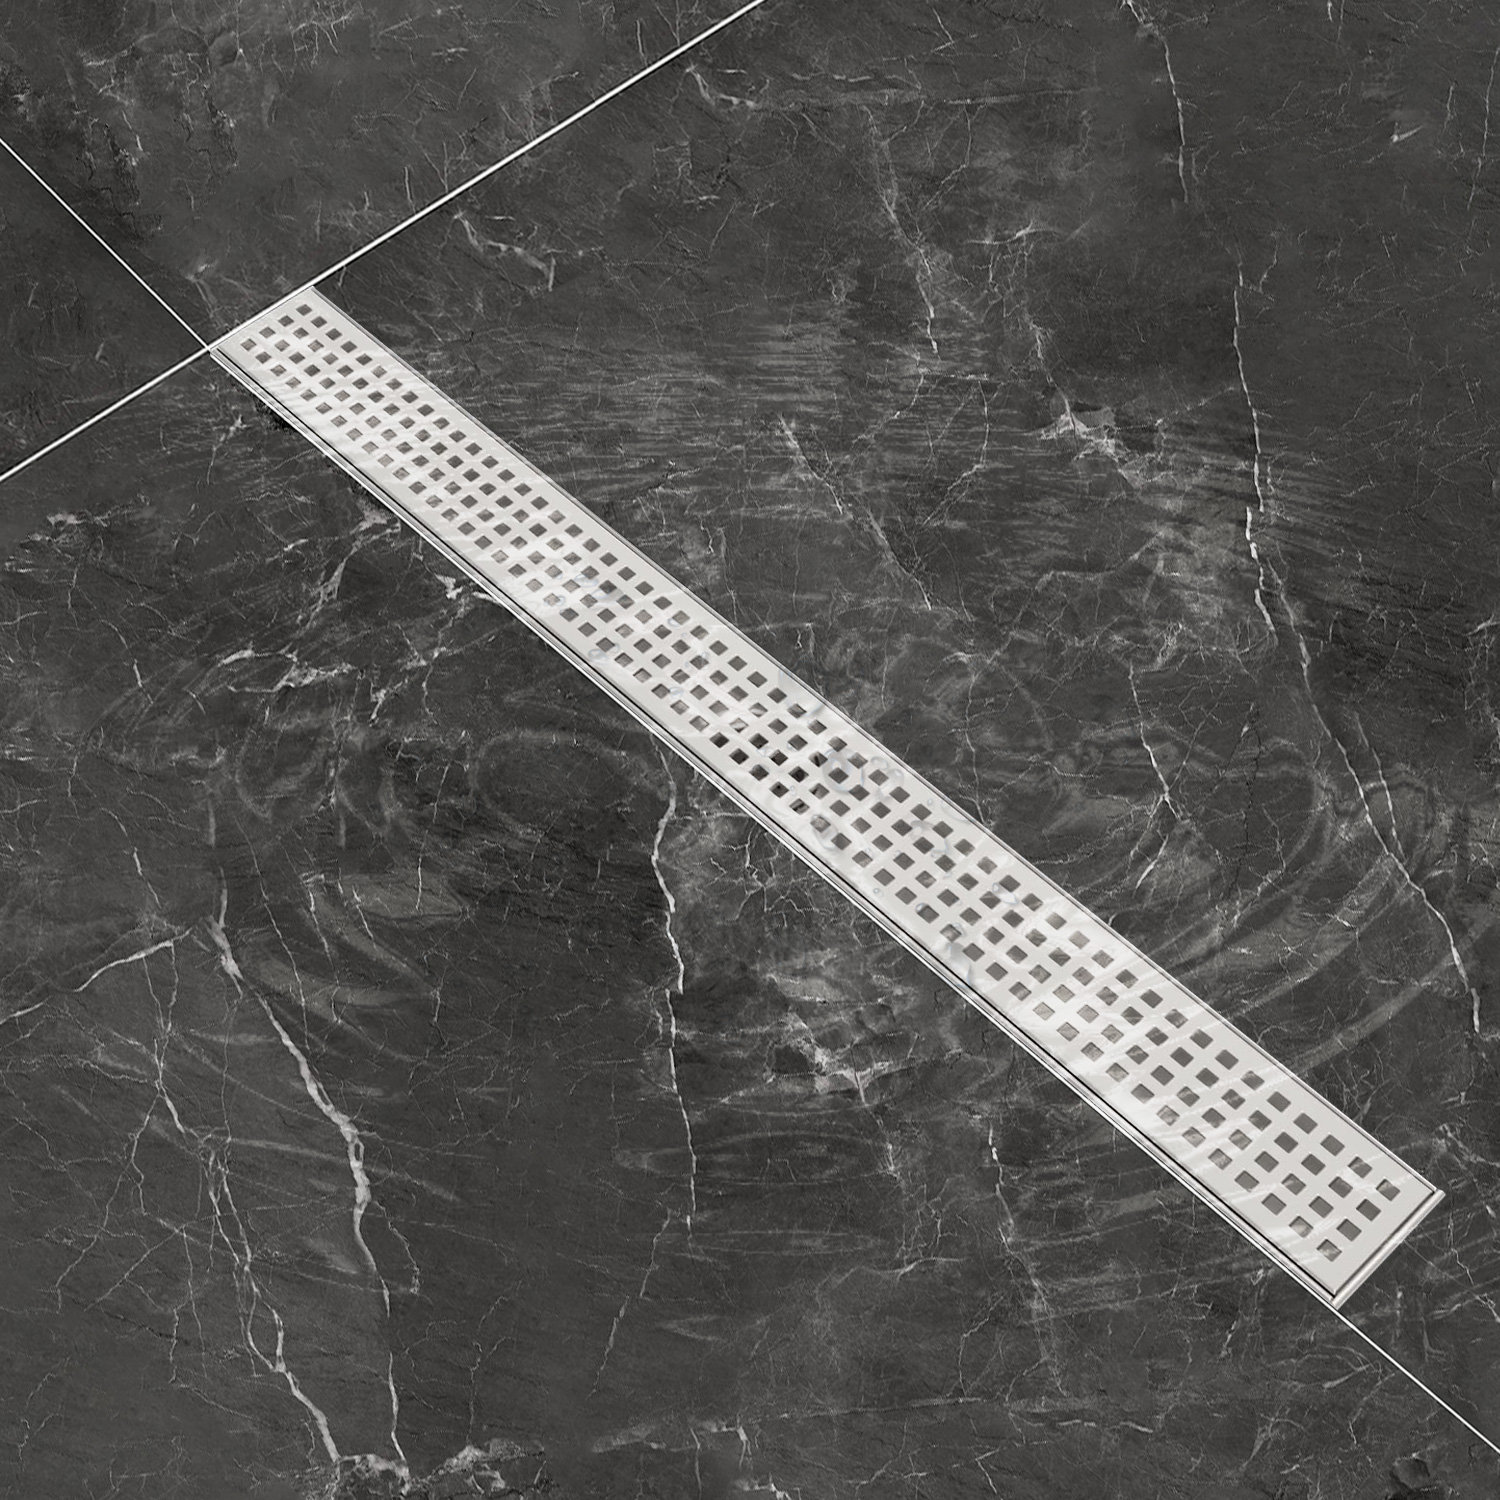 Interbath 32 in. Stainless Steel Linear Shower Drain with Tile-In Pattern Drain Cover in Brushed Nickel